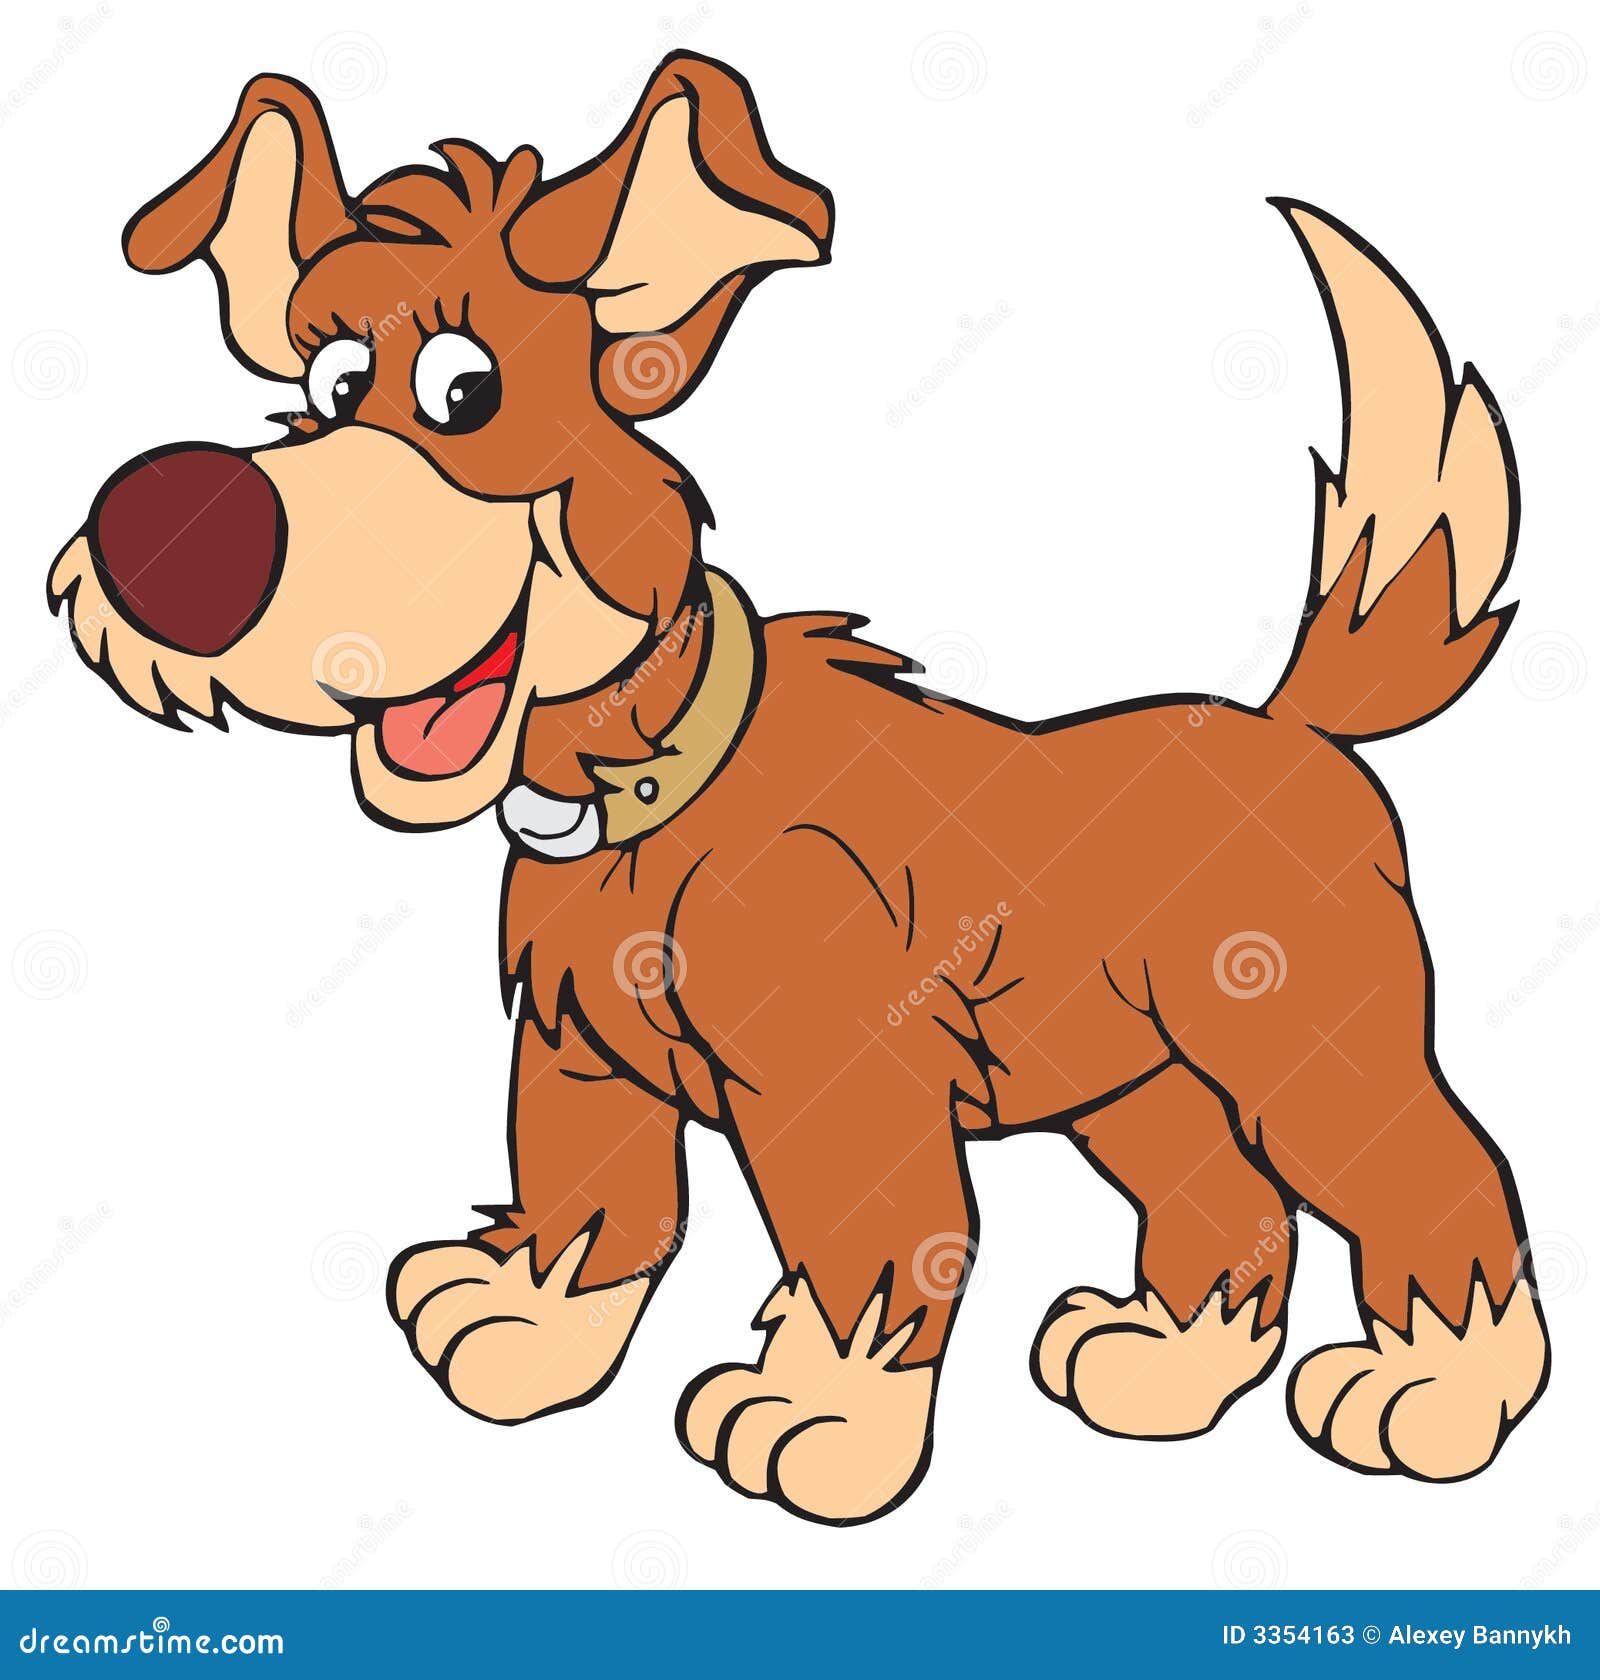 free vector clipart dogs - photo #10